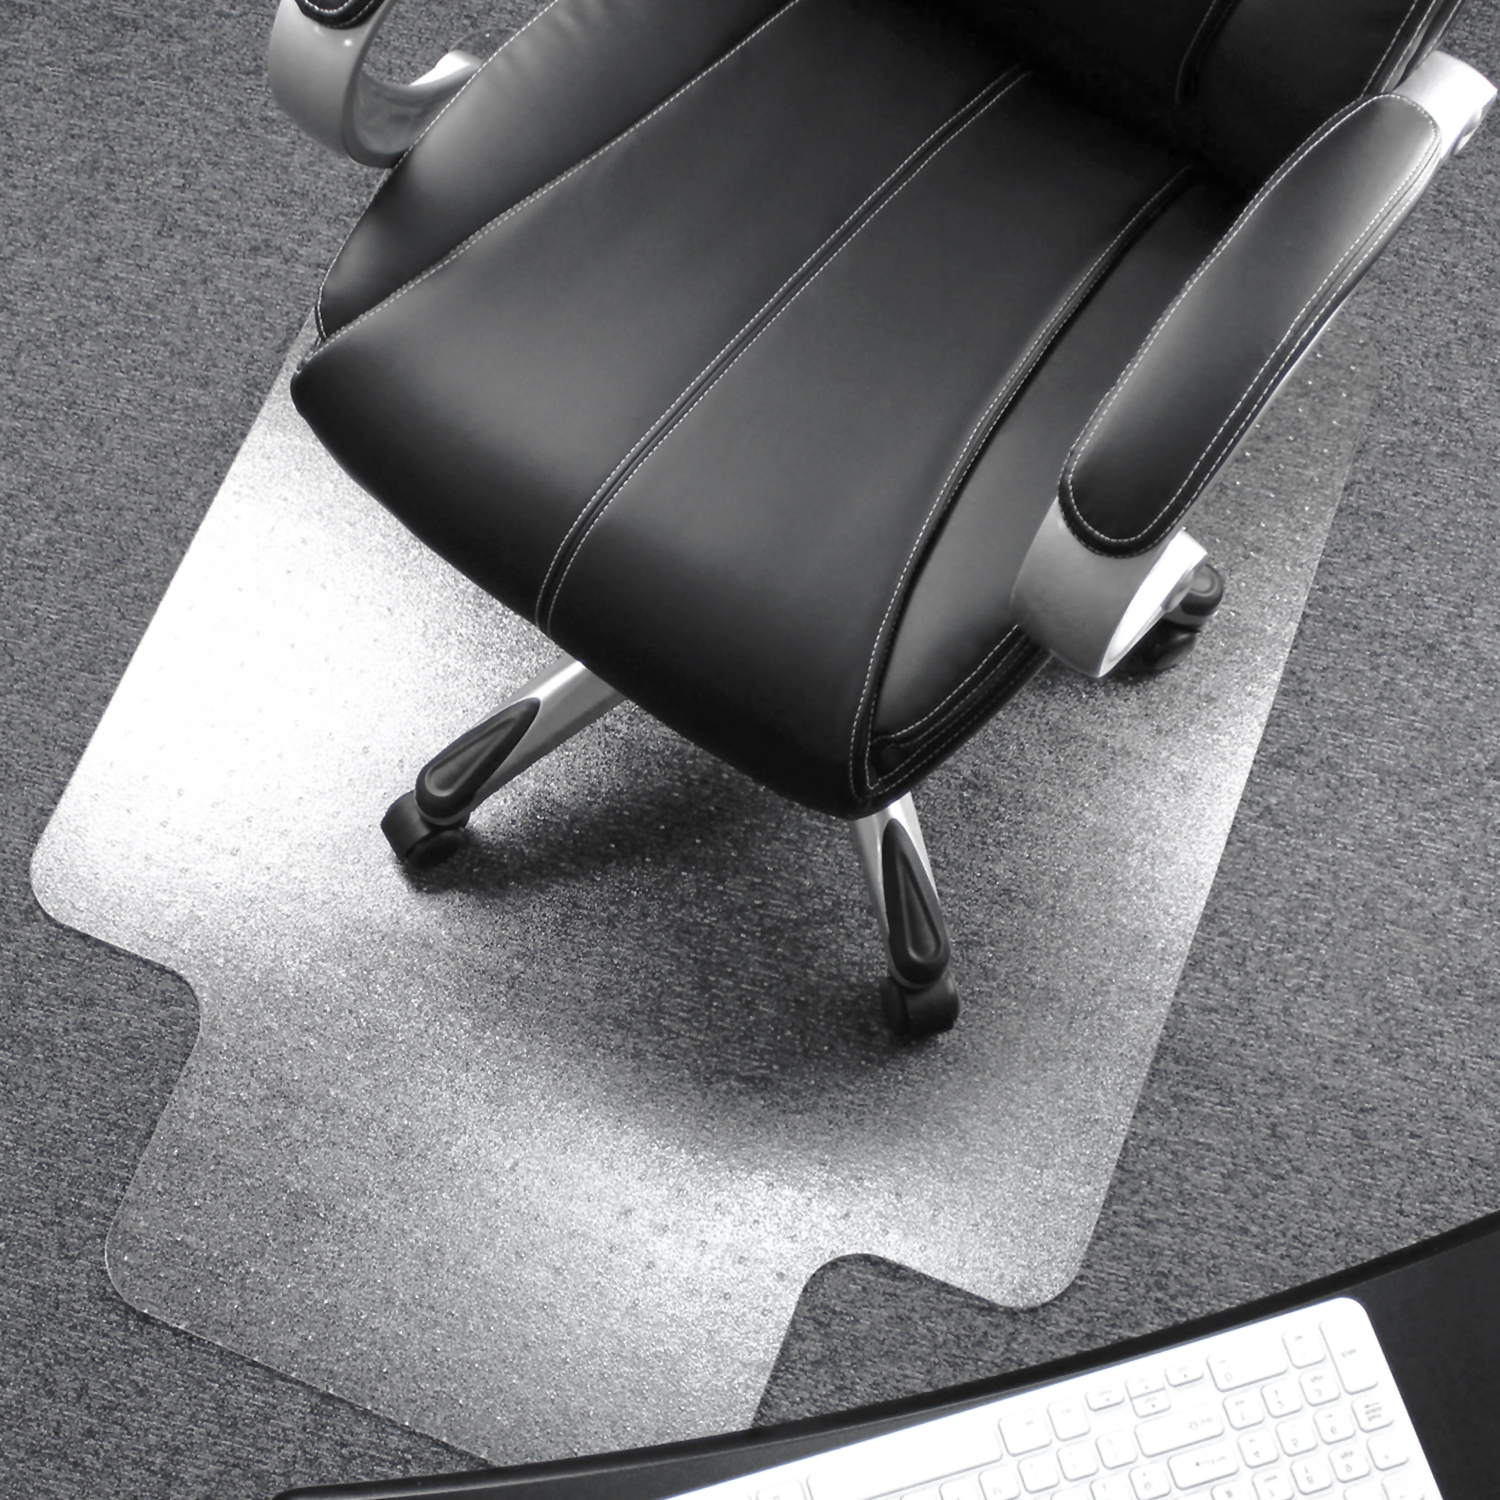 Ultimat® Polycarbonate Lipped Chair Mat for Carpets up to 1/2" - 48 x 53" - image 1 of 13